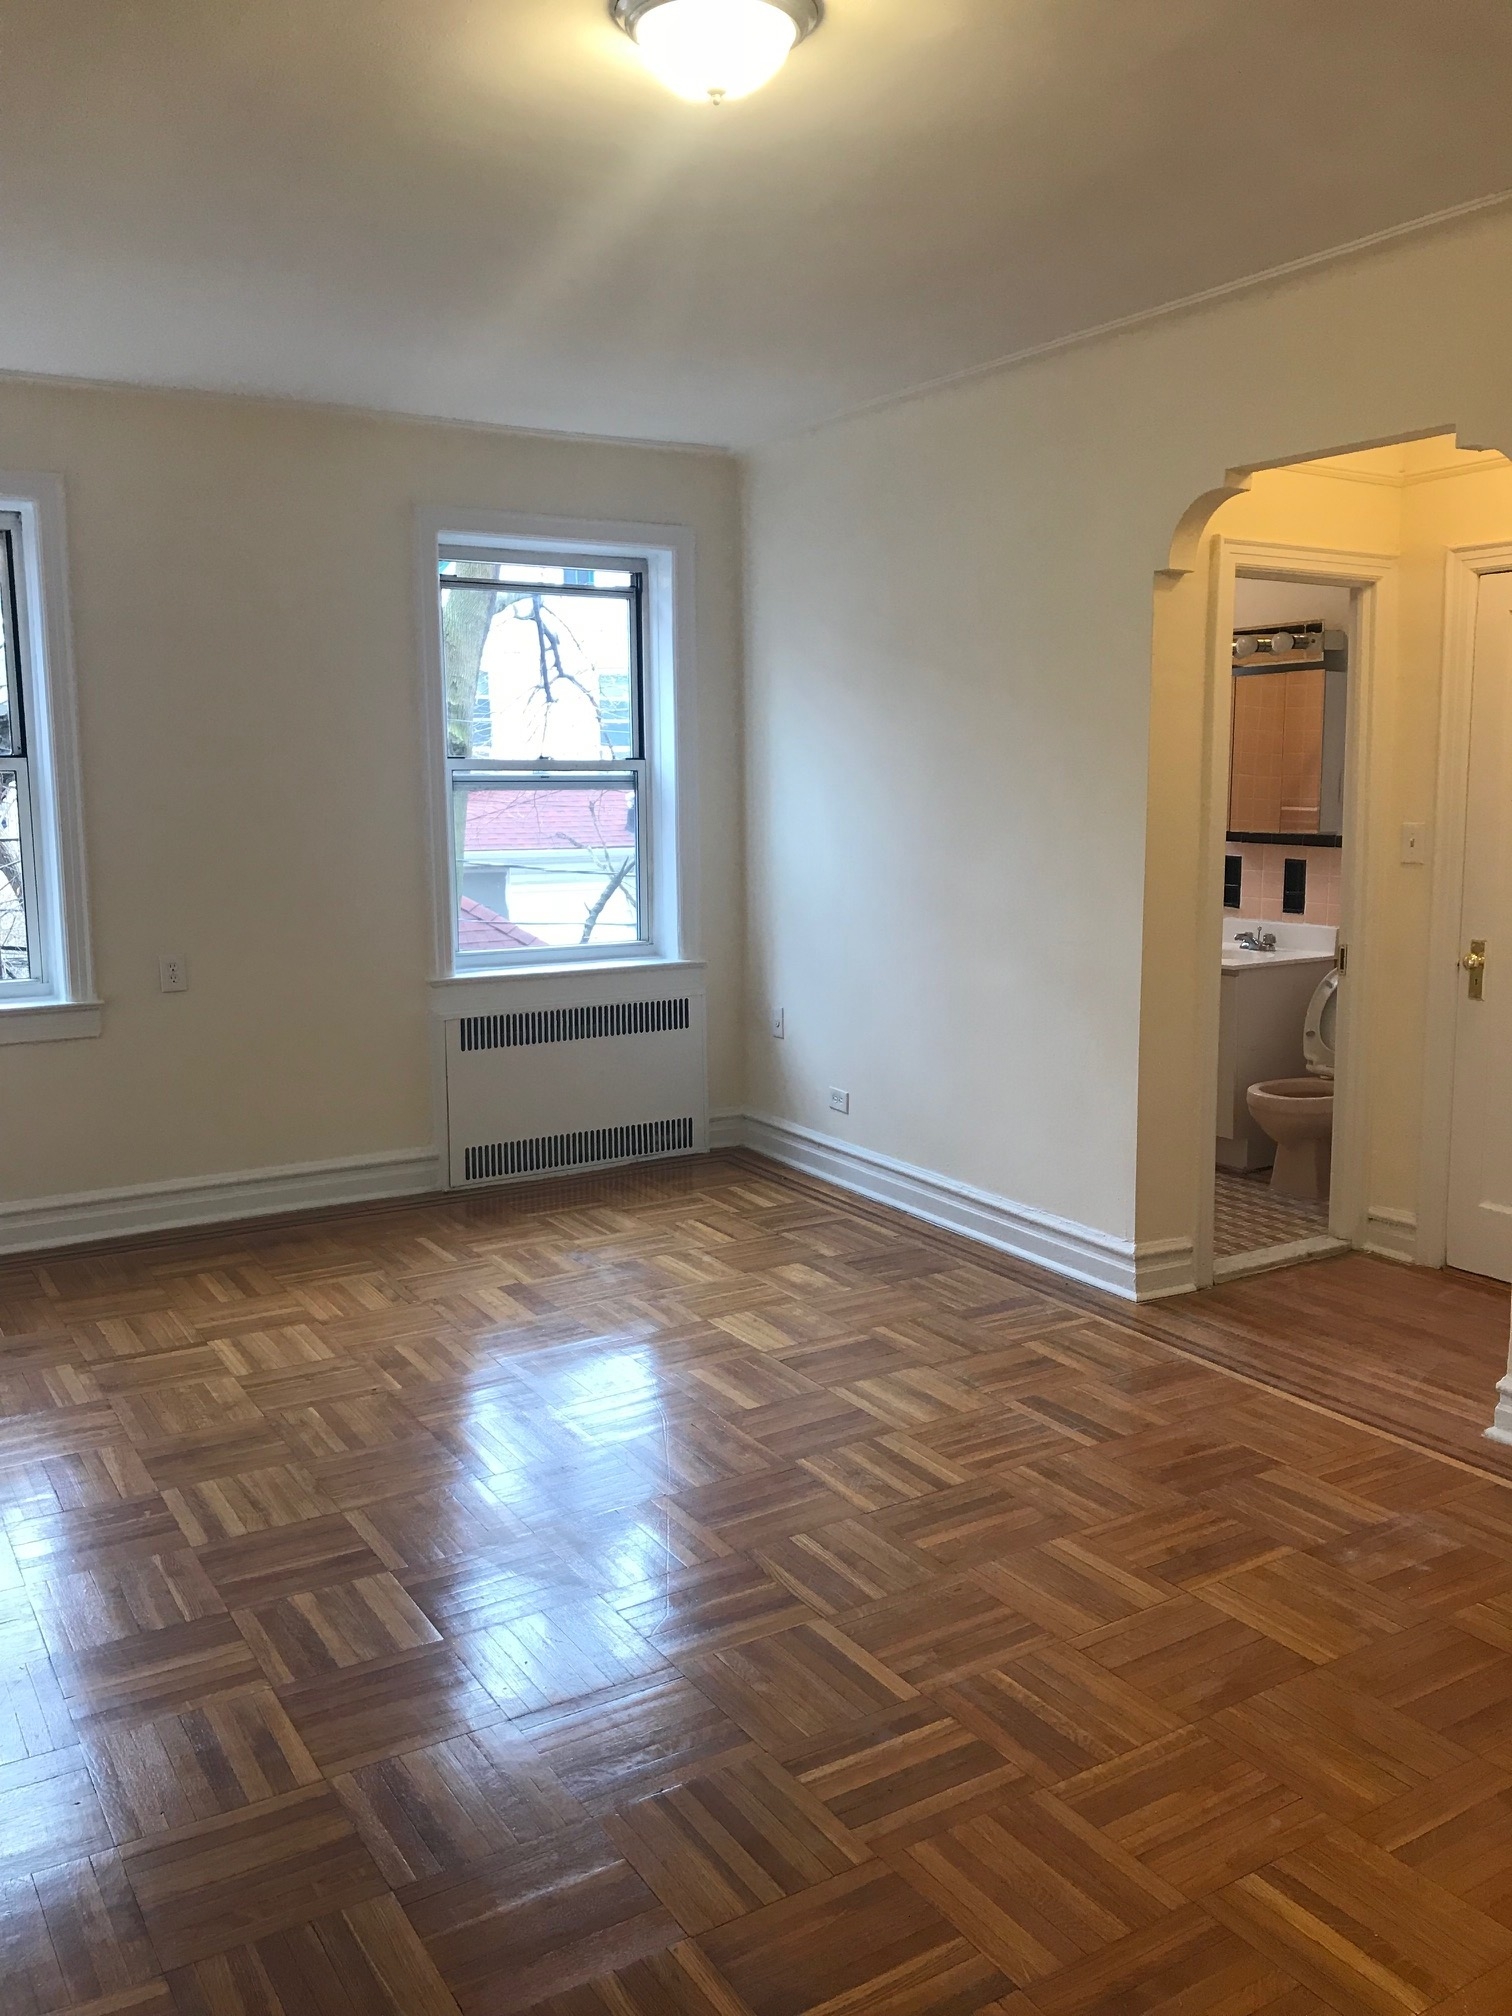 Apartment 108th Street  Queens, NY 11375, MLS-RD2026-8